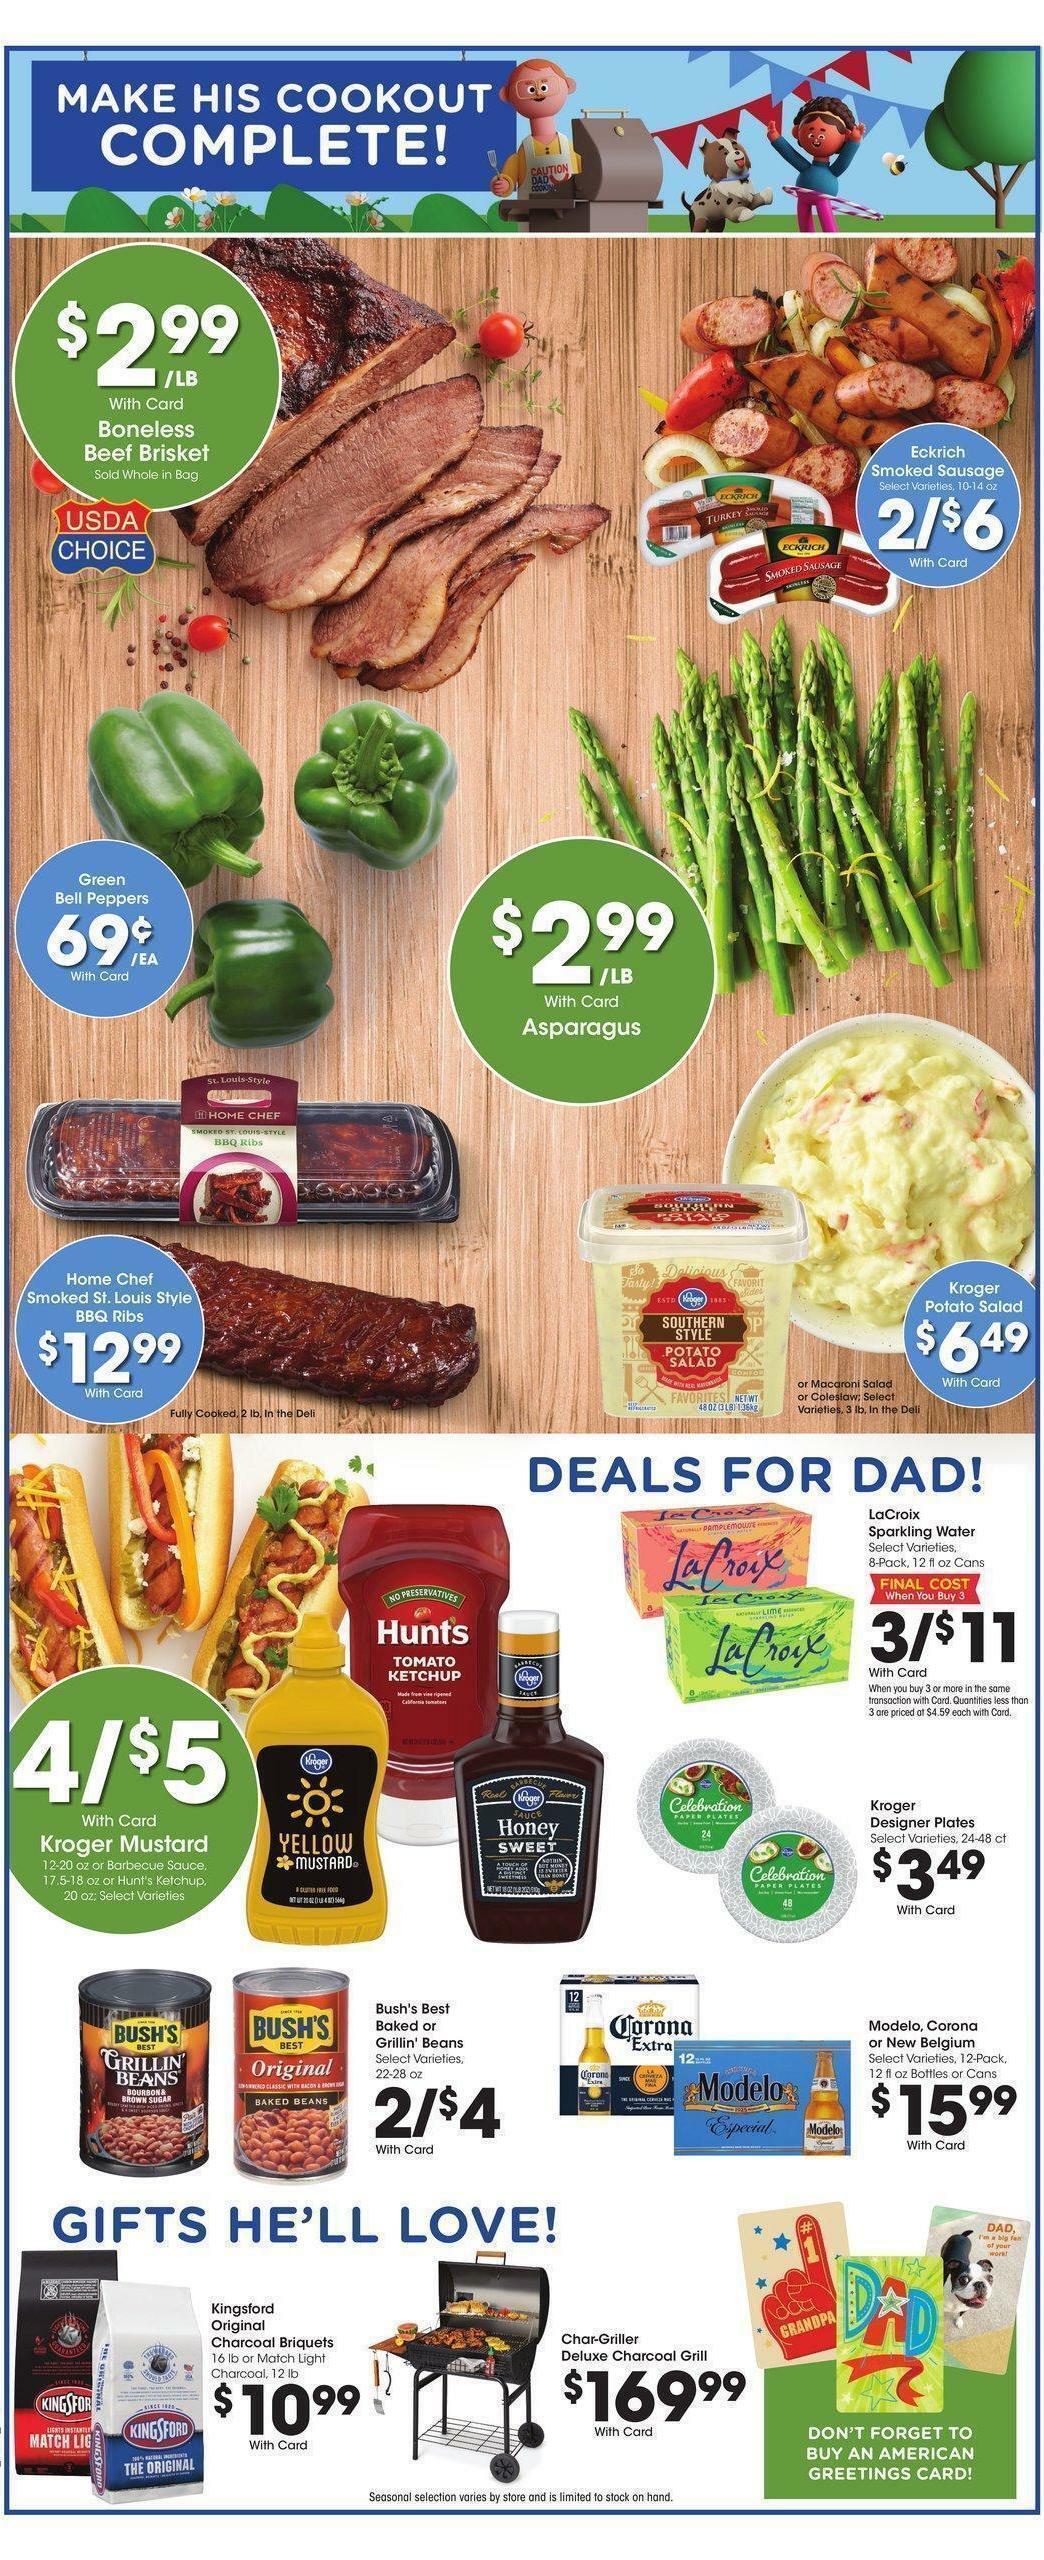 Fry's Food Weekly Ad from June 14